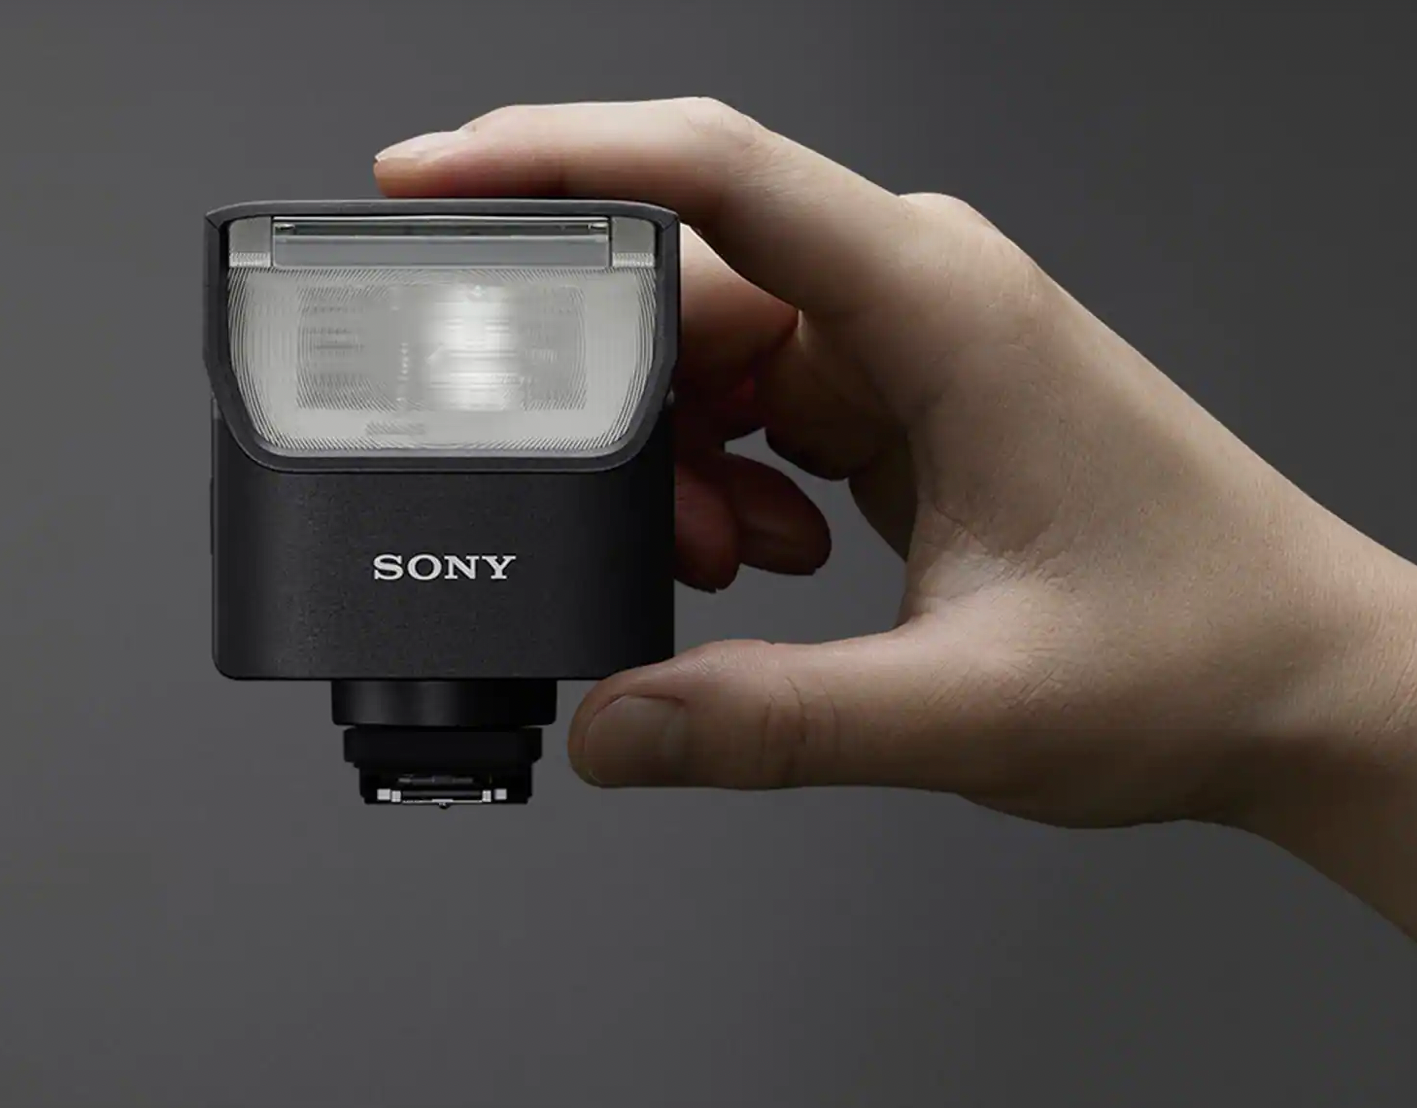 Sony HVL-F28RM External Flash by Sony at B&C Camera